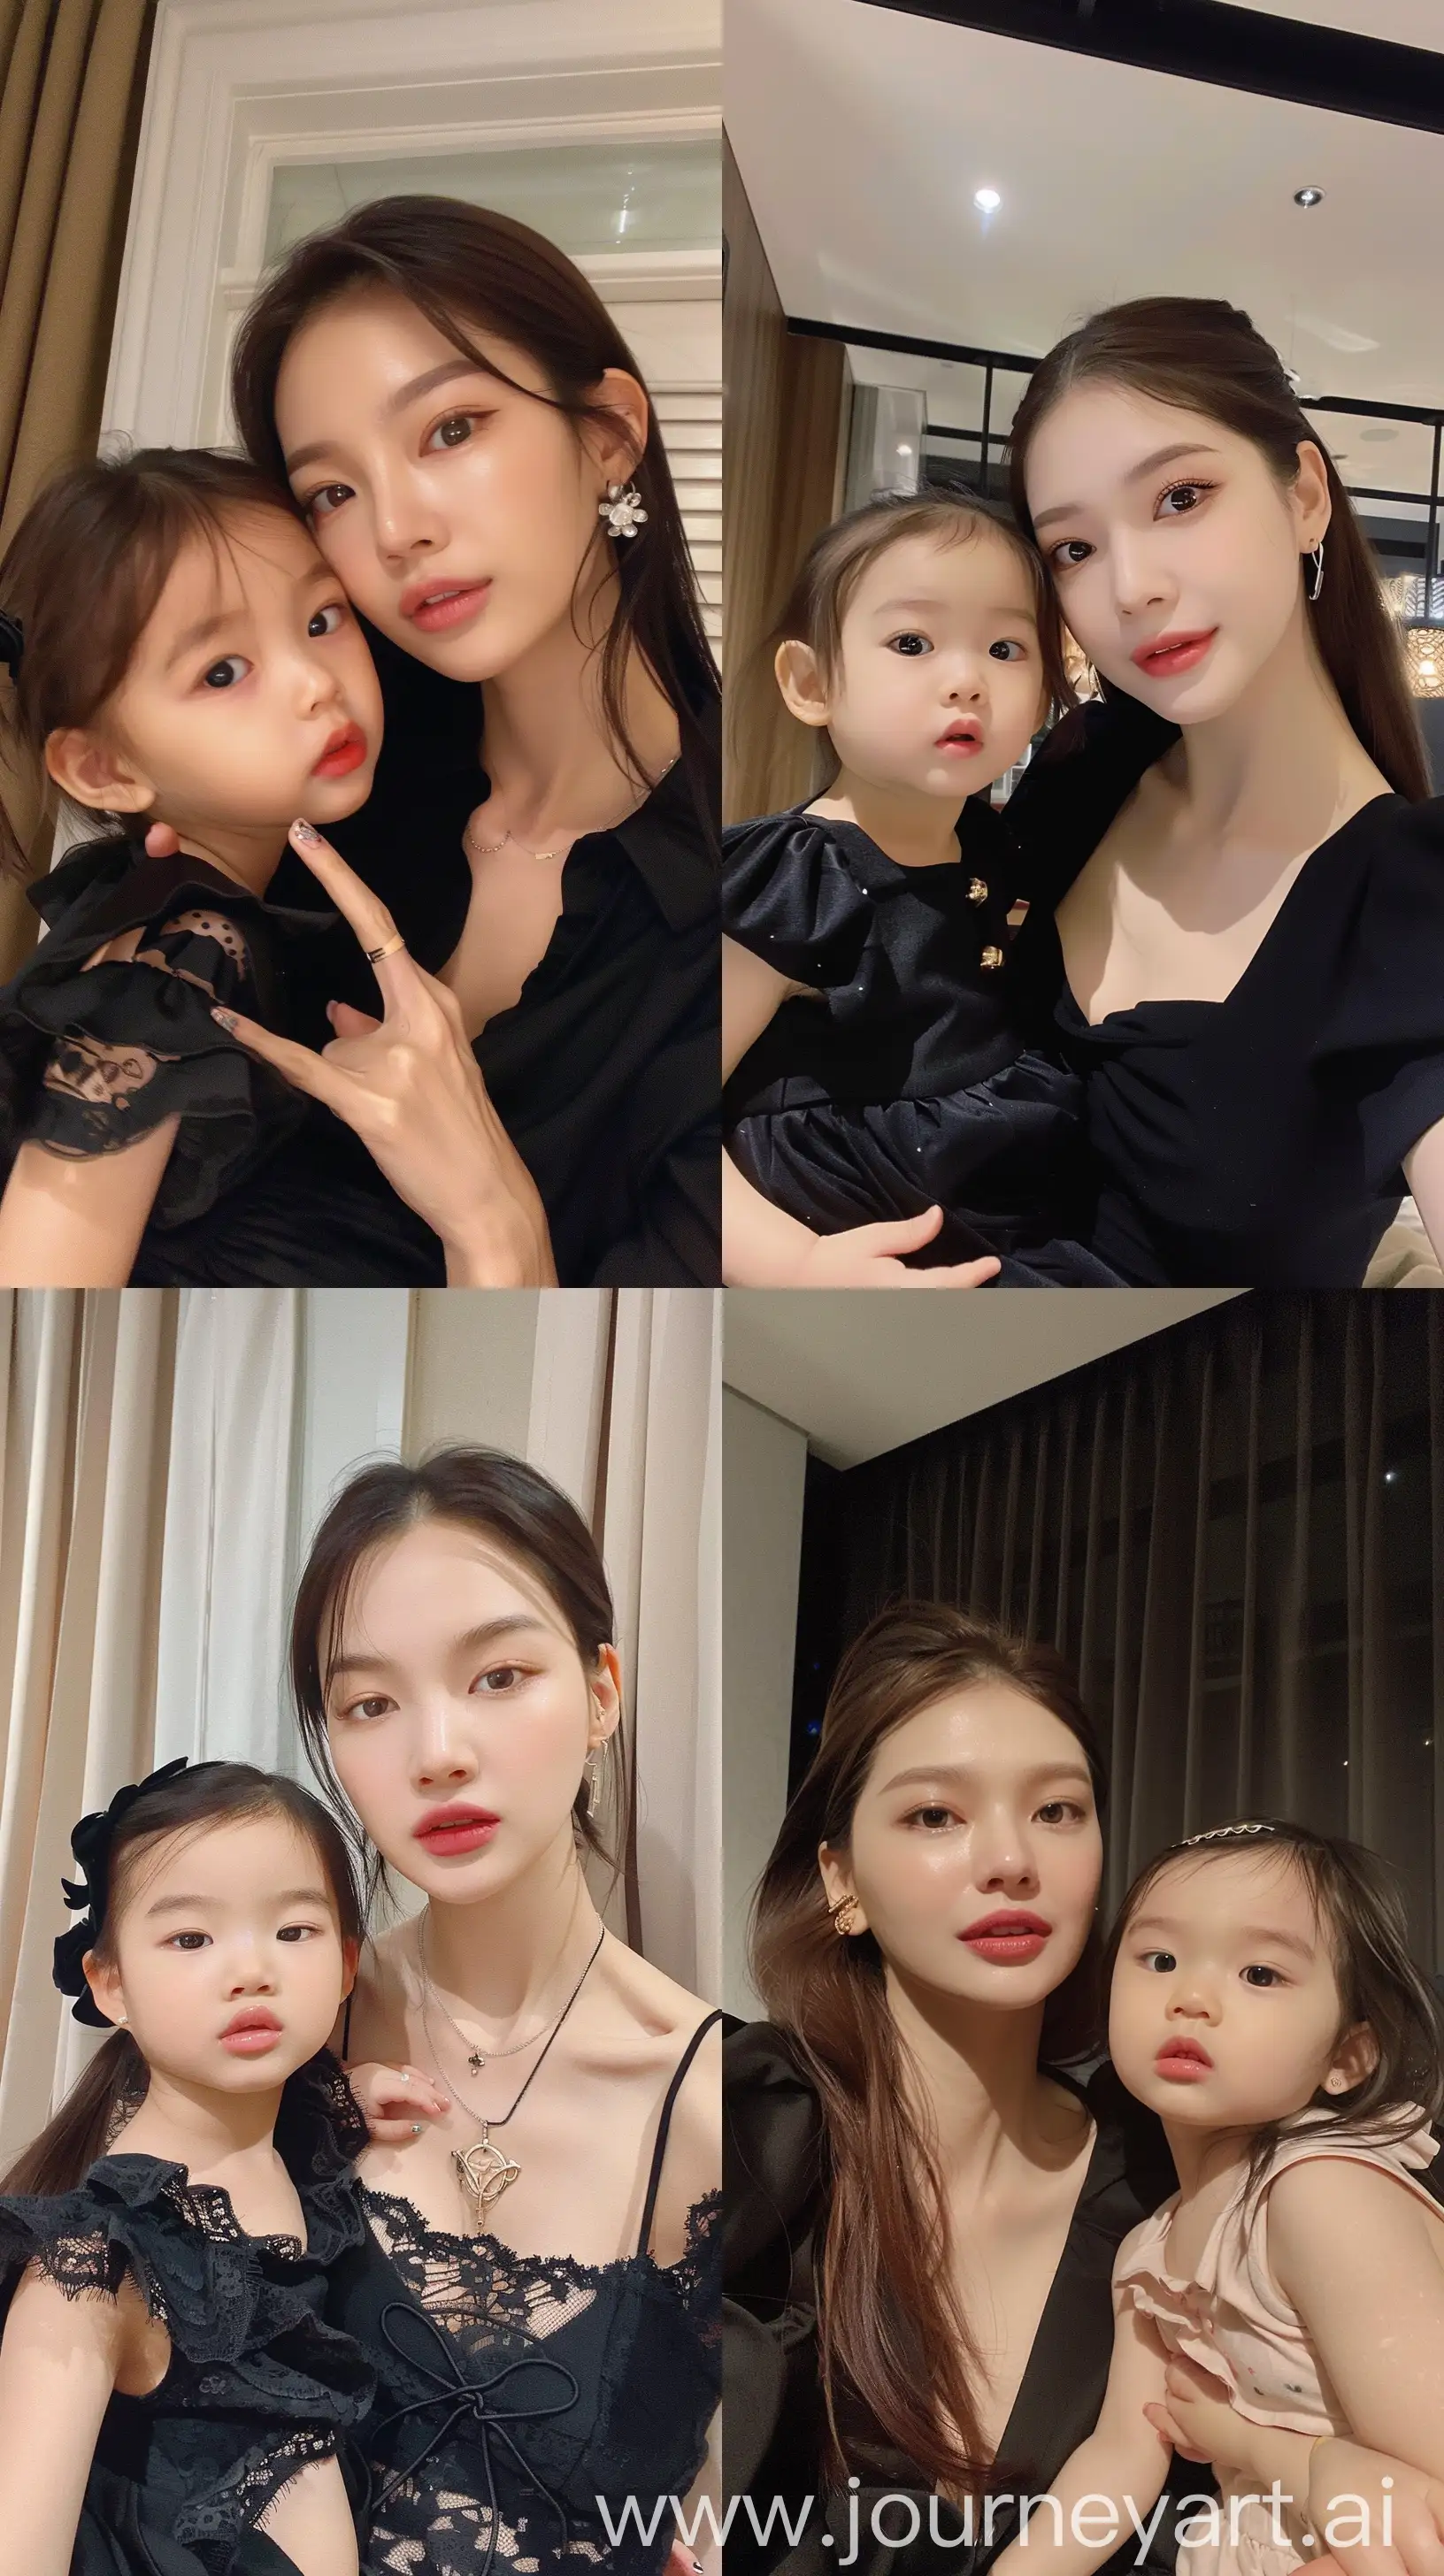 blackpink's jennie selfie with 2 years old  girl, facial feature look a like blackpink's jennie, aestethic selfie, wearing black drezs, night times, aestethic make up,hotly elegant young mom --ar 9:16 